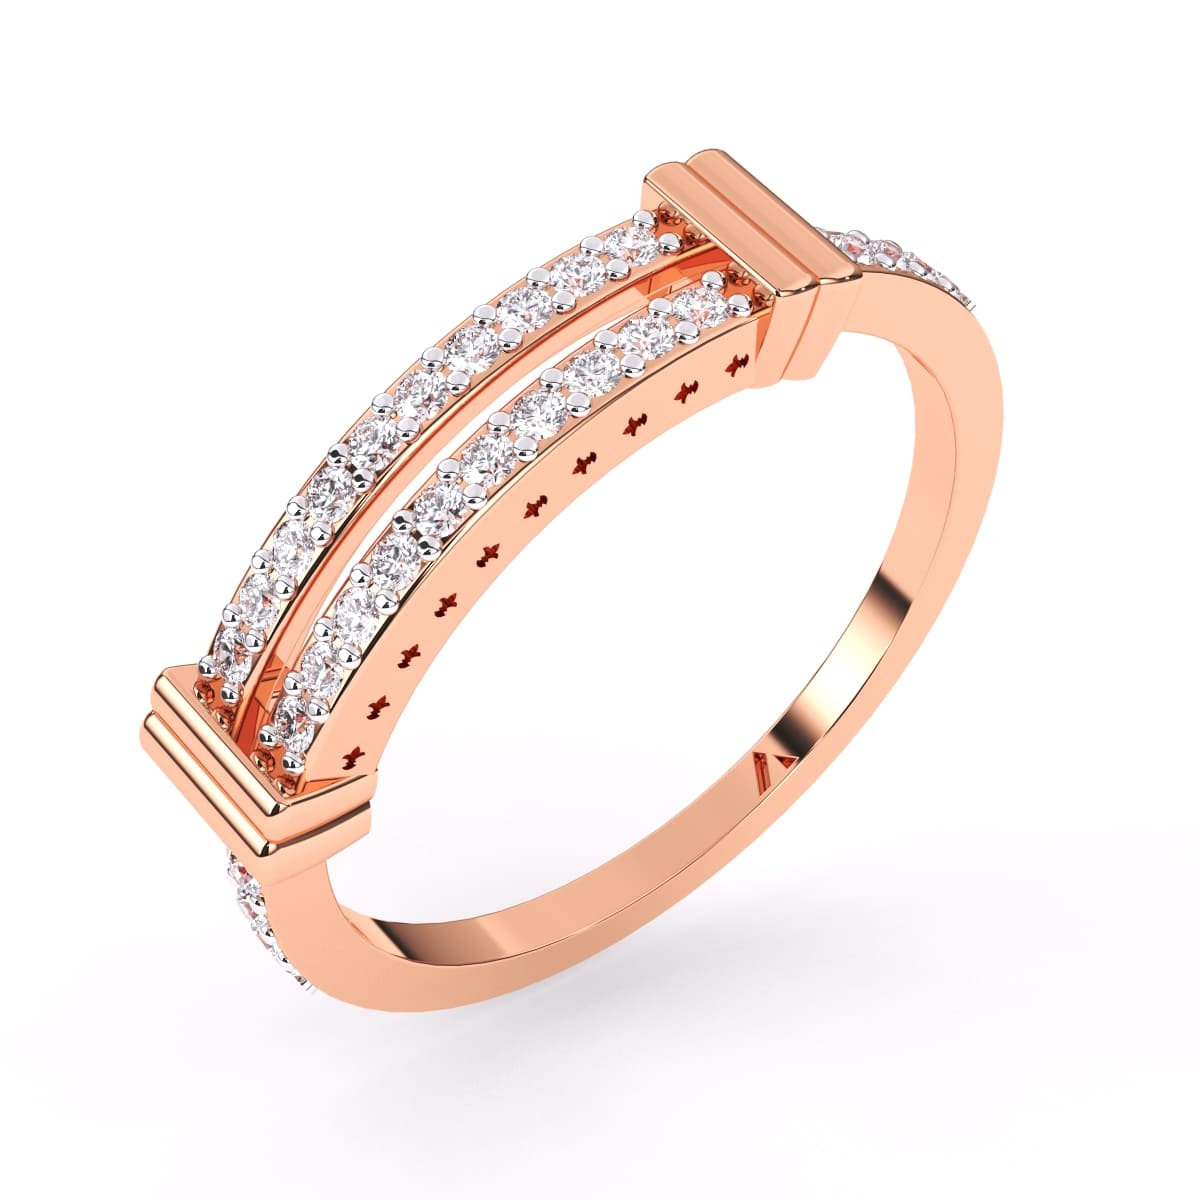 Search results for: 'the glow flow diamond ring' | Diamond rings with  price, Buy diamond ring, Diamond pendants designs